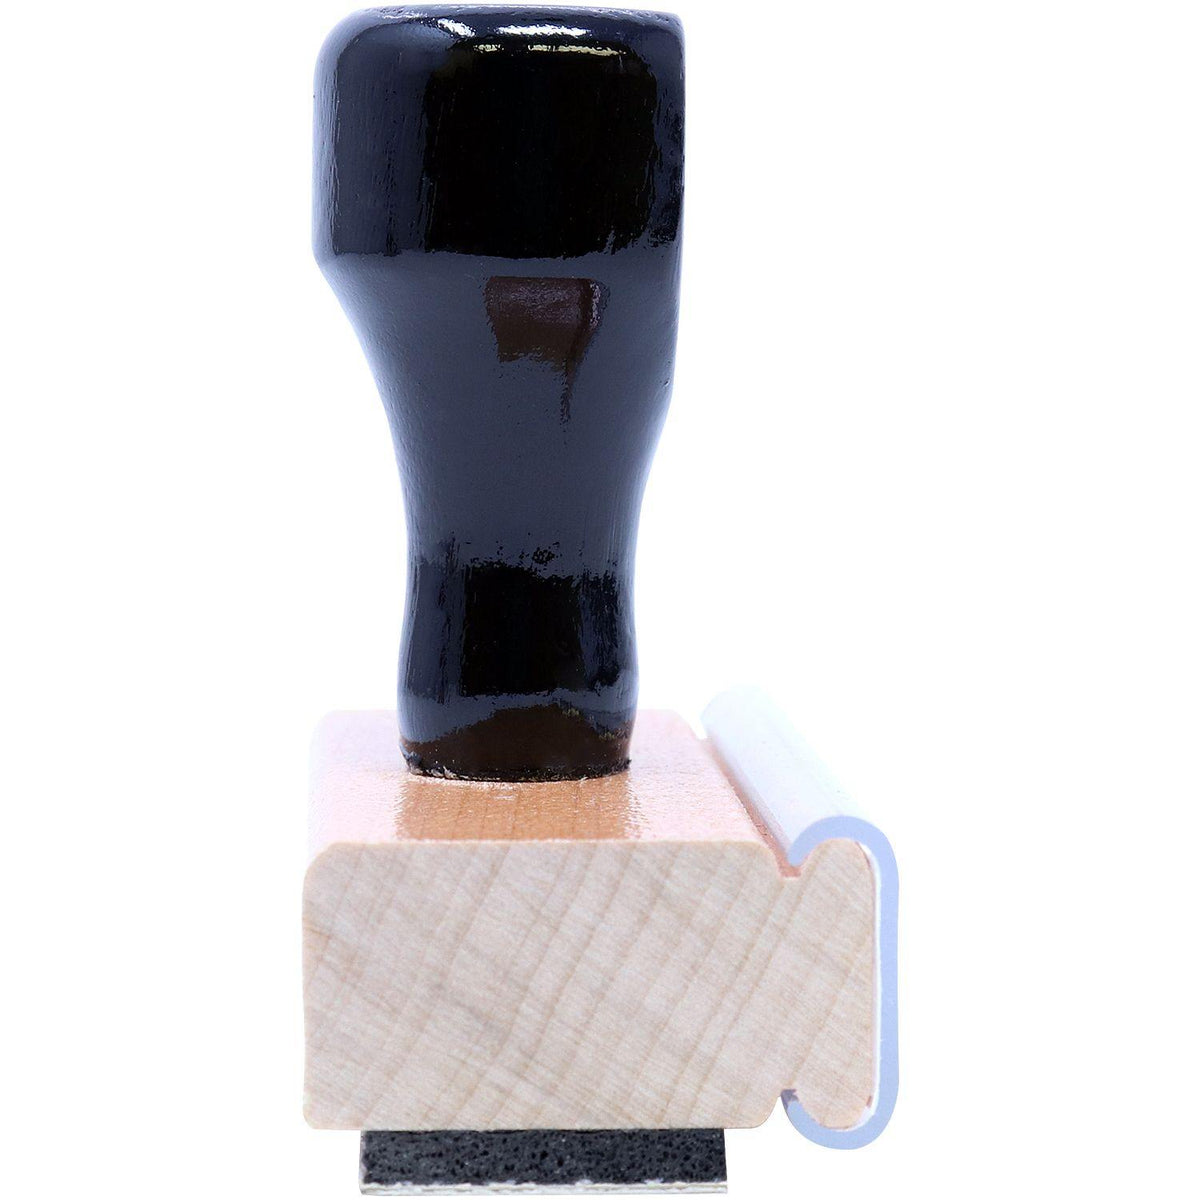 Side View of Large Office Copy Rubber Stamp